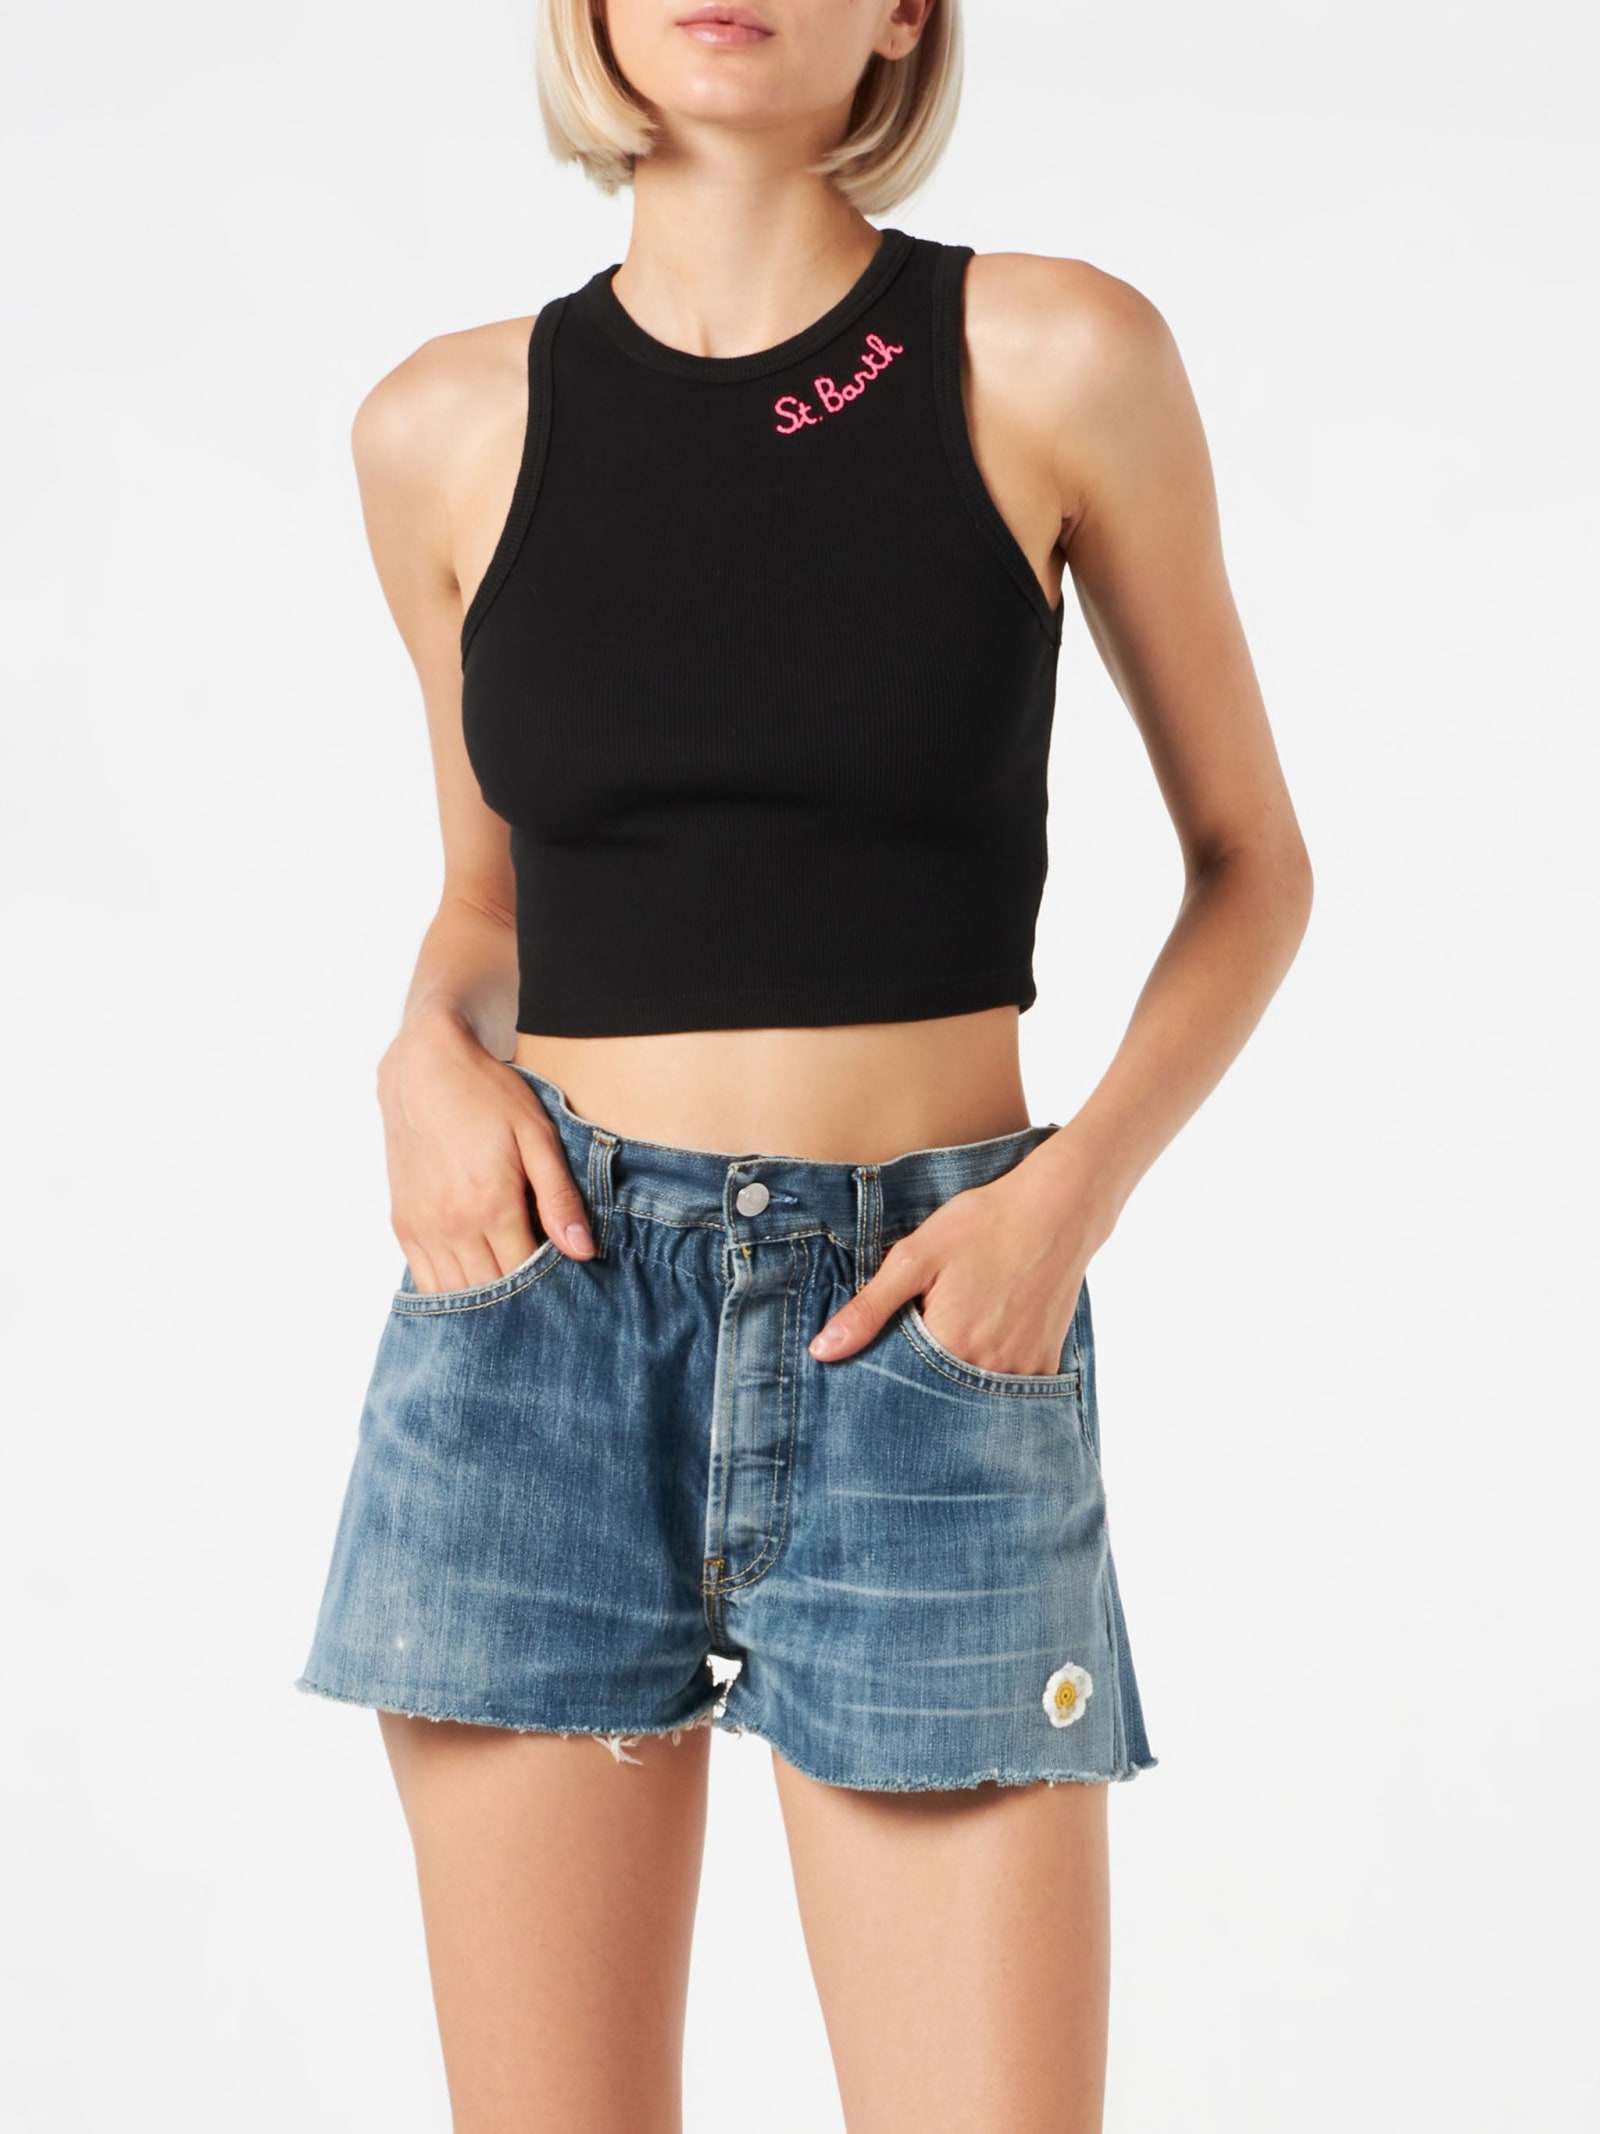 Cotton Crop Tank Top With St. Barth Embroidery